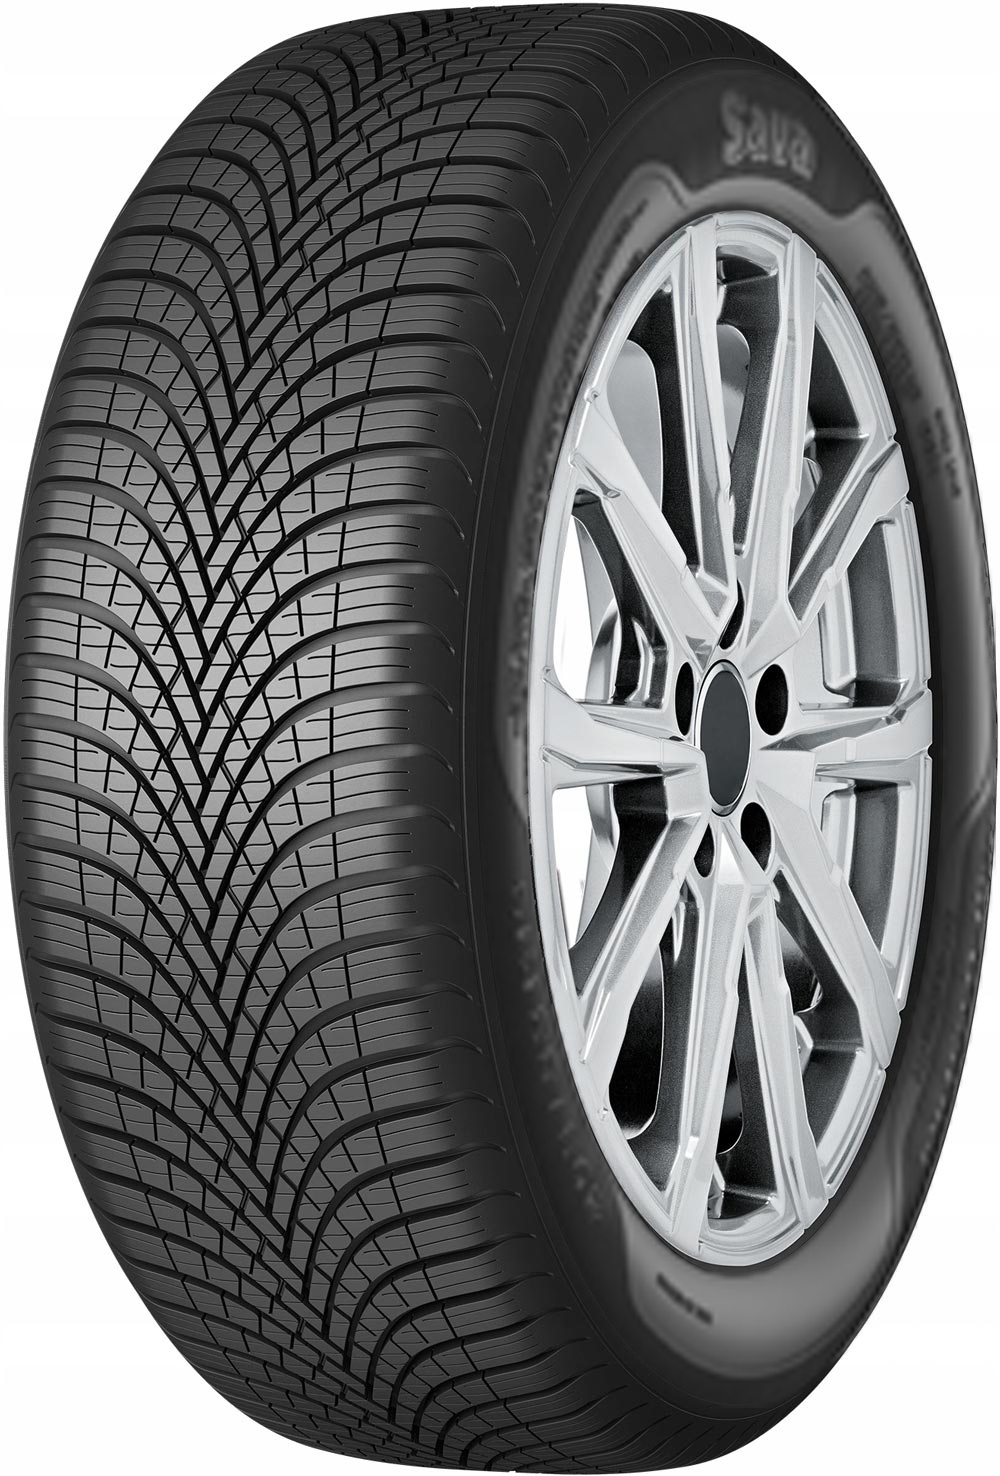 Anvelope auto SAVA ALL WEATHER XL 205/55 R16 94V